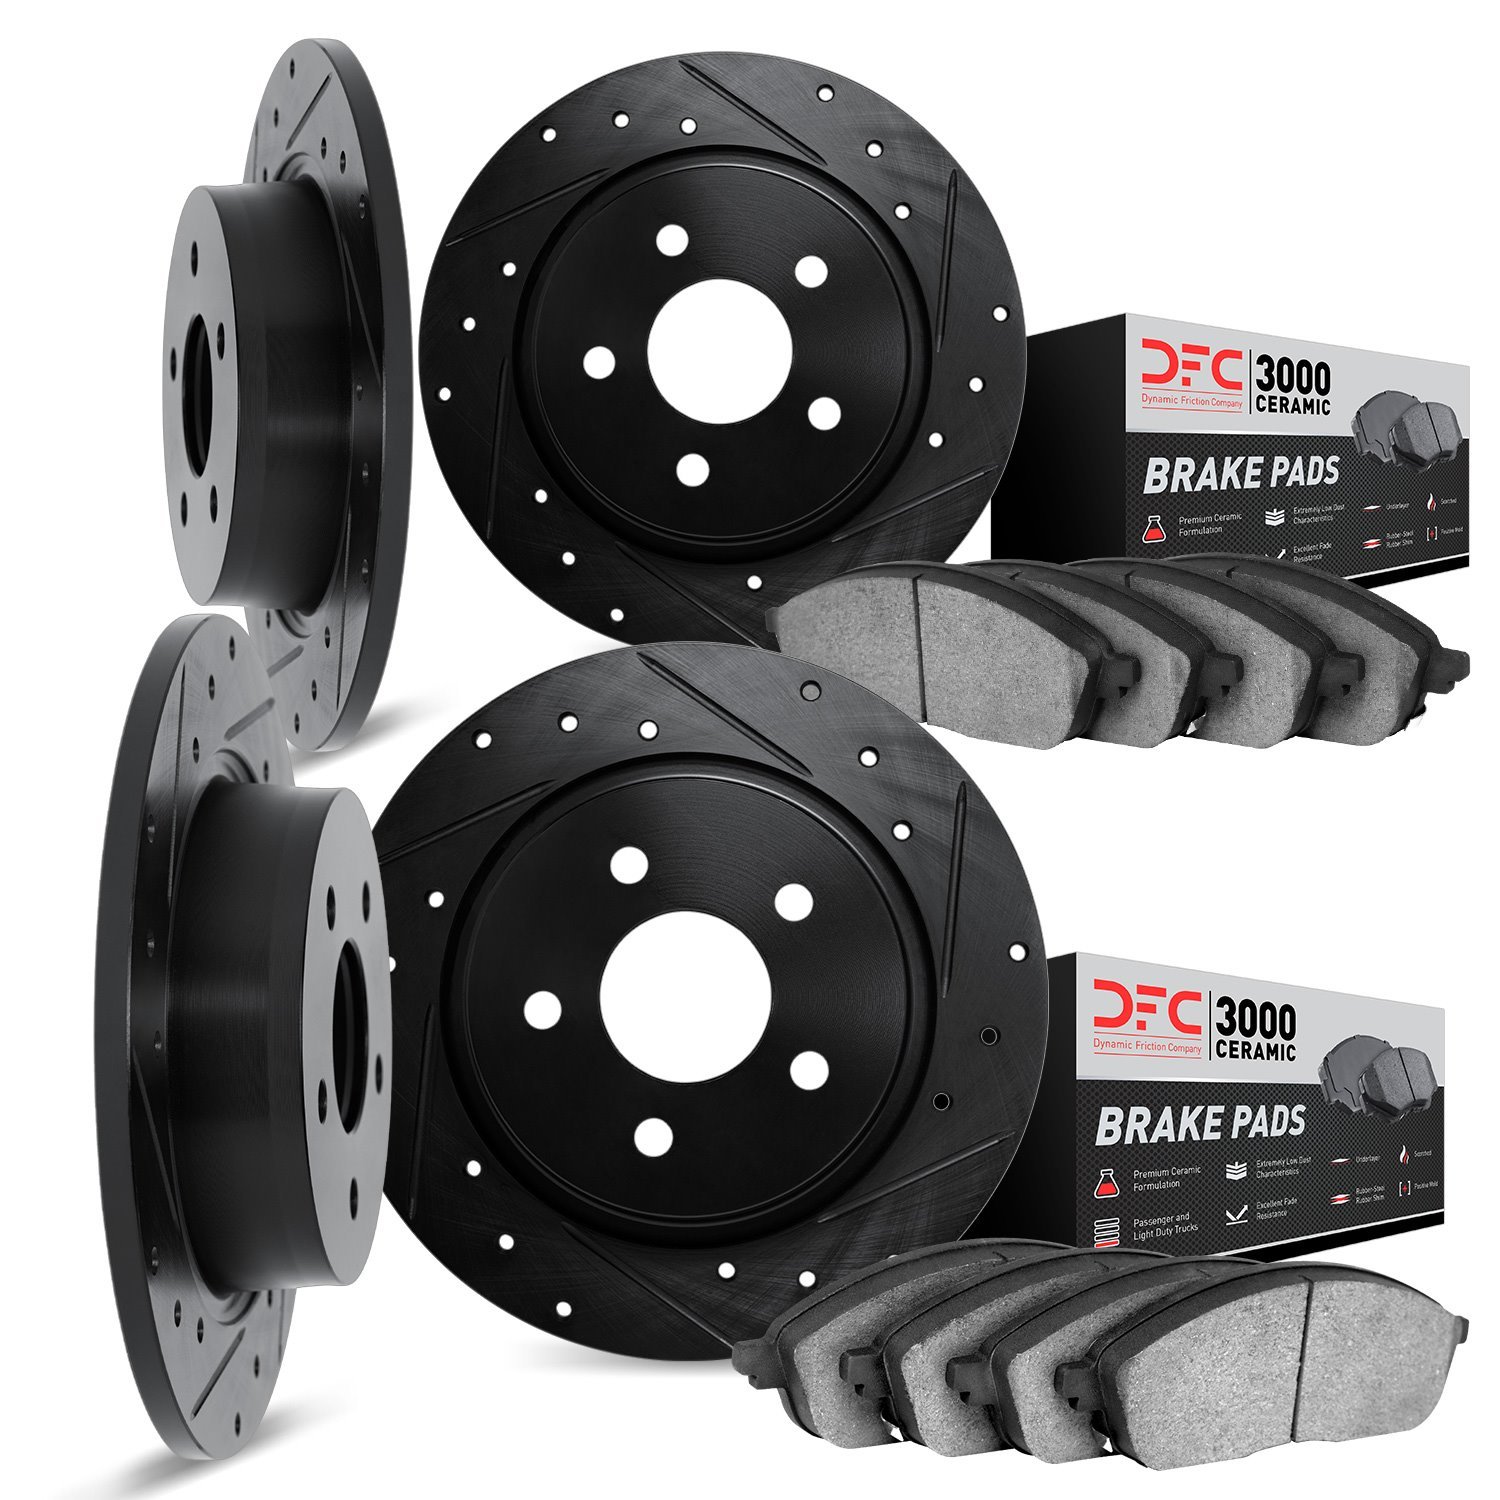 8304-52001 Drilled/Slotted Brake Rotors with 3000-Series Ceramic Brake Pads Kit [Black], 1984-1987 GM, Position: Front and Rear